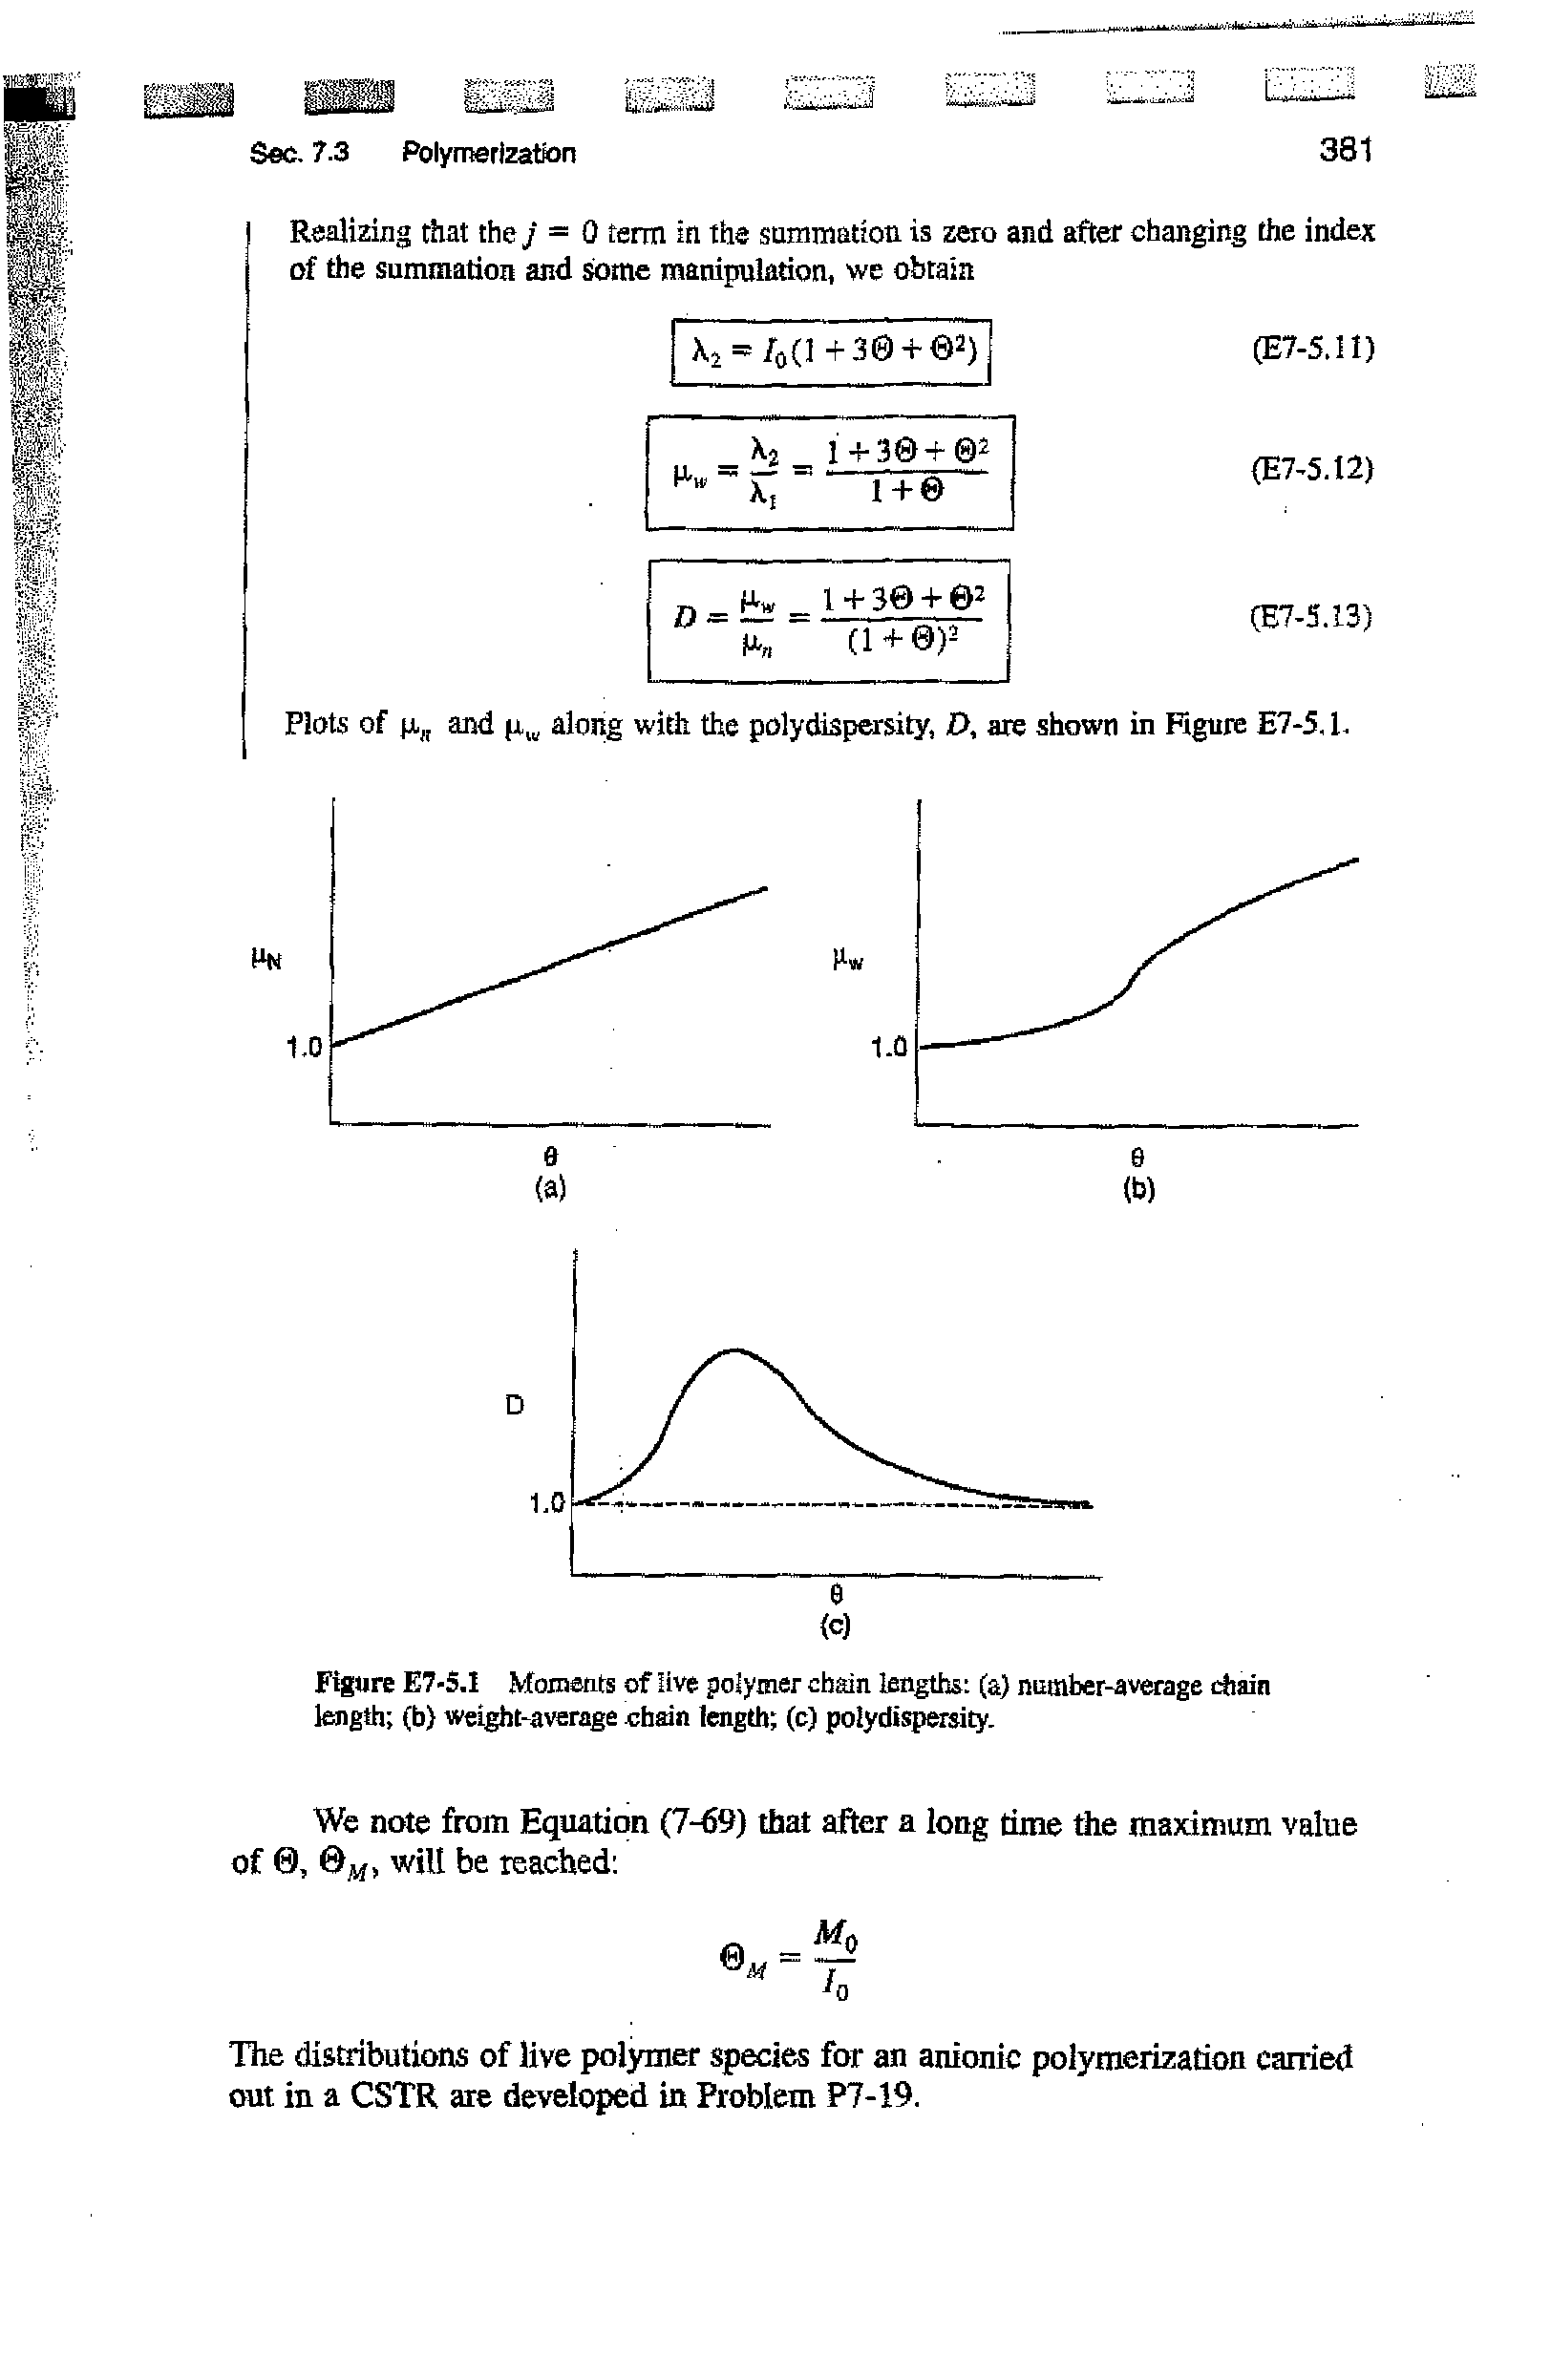 Figure E7-5.I Moments of live polymer chain lengths (a) number-average chain length (b> weight-average chain length (c) polydispersity.